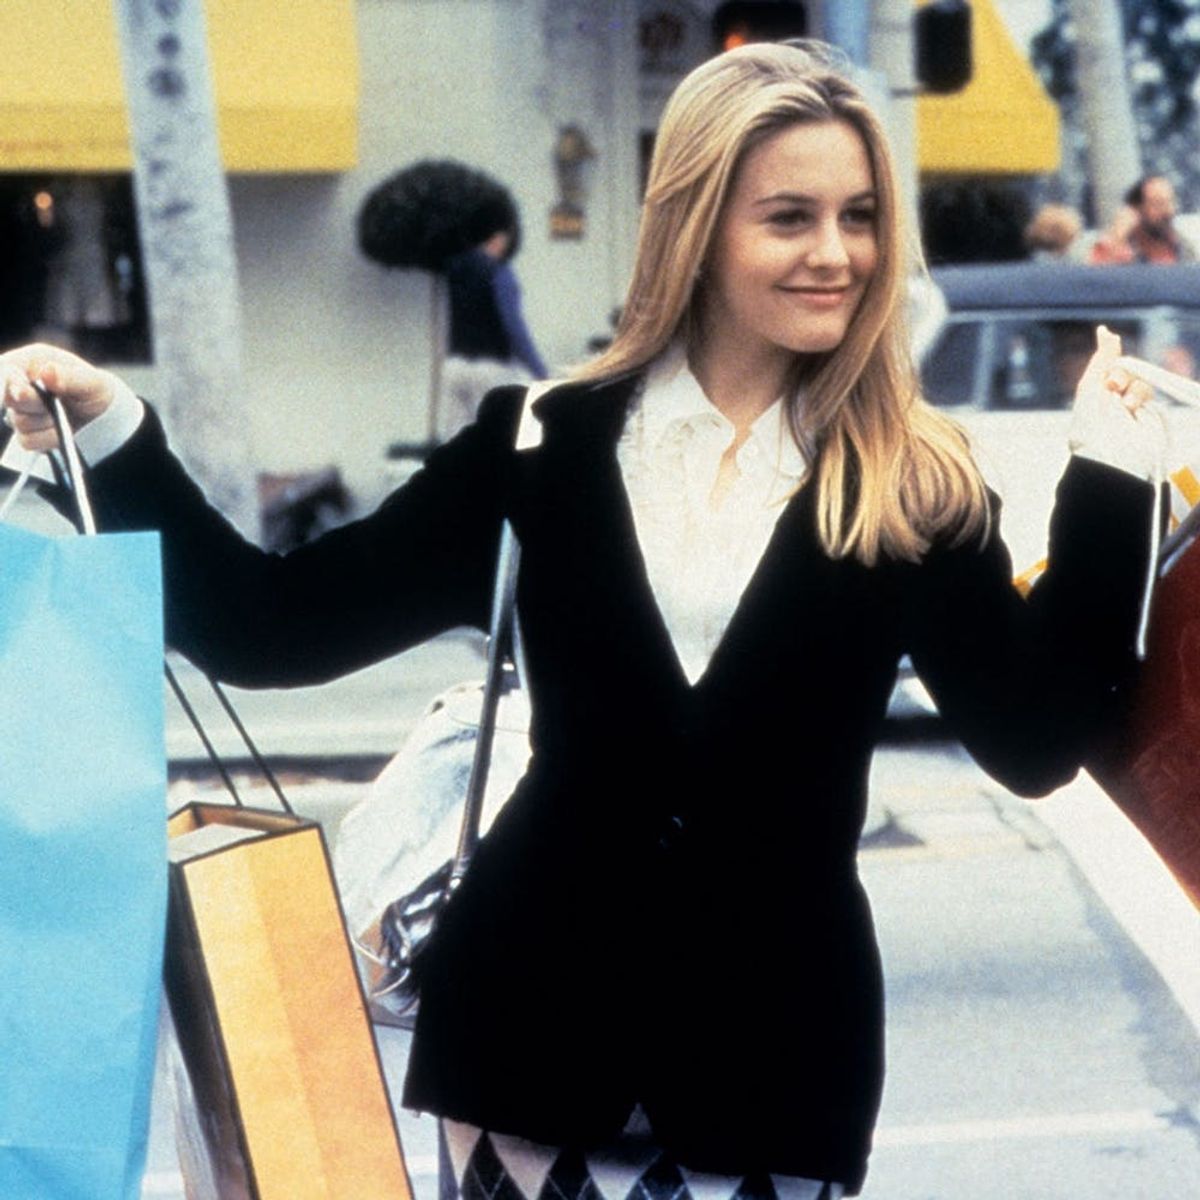 Alicia Silverstone Reveals Her One Major Clueless Regret and It Will Make Your Cringe